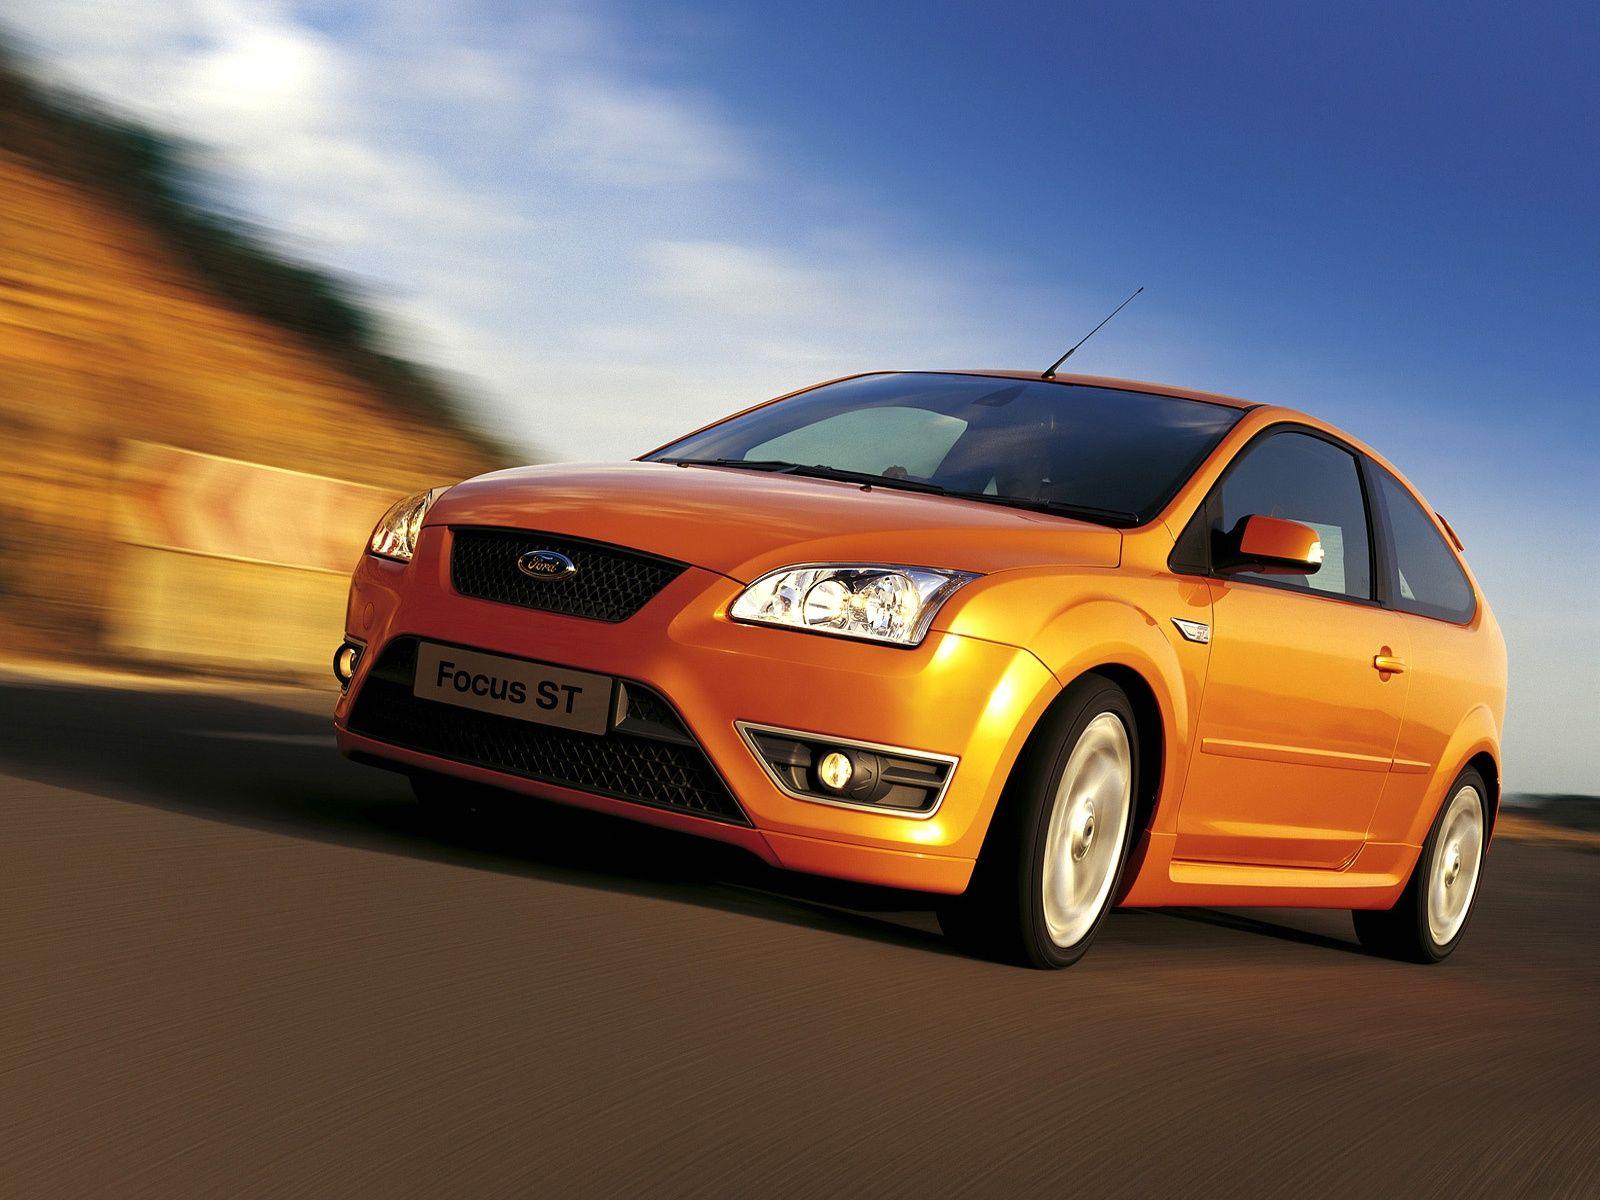 Ford Focus ST 3 wallpaper. Ford Focus ST 3